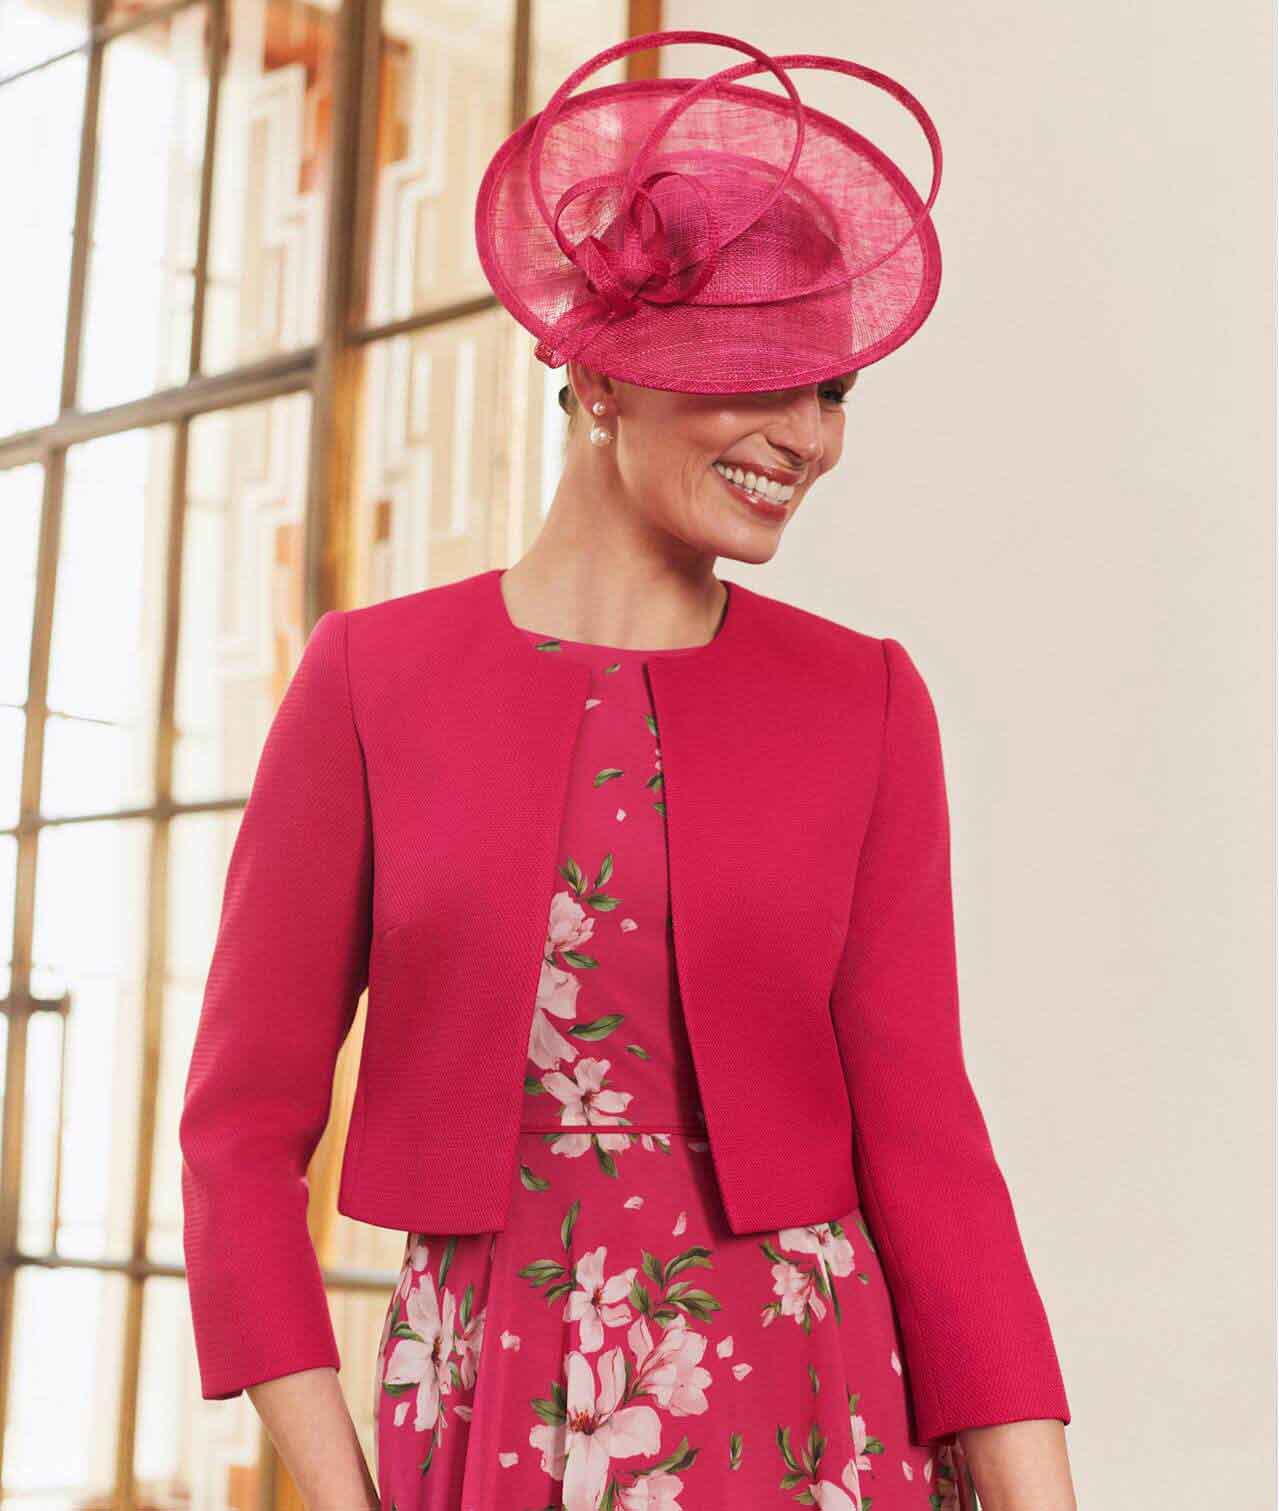 Hobbs model wears a pink floral dress with a matching fascinator and jacket.